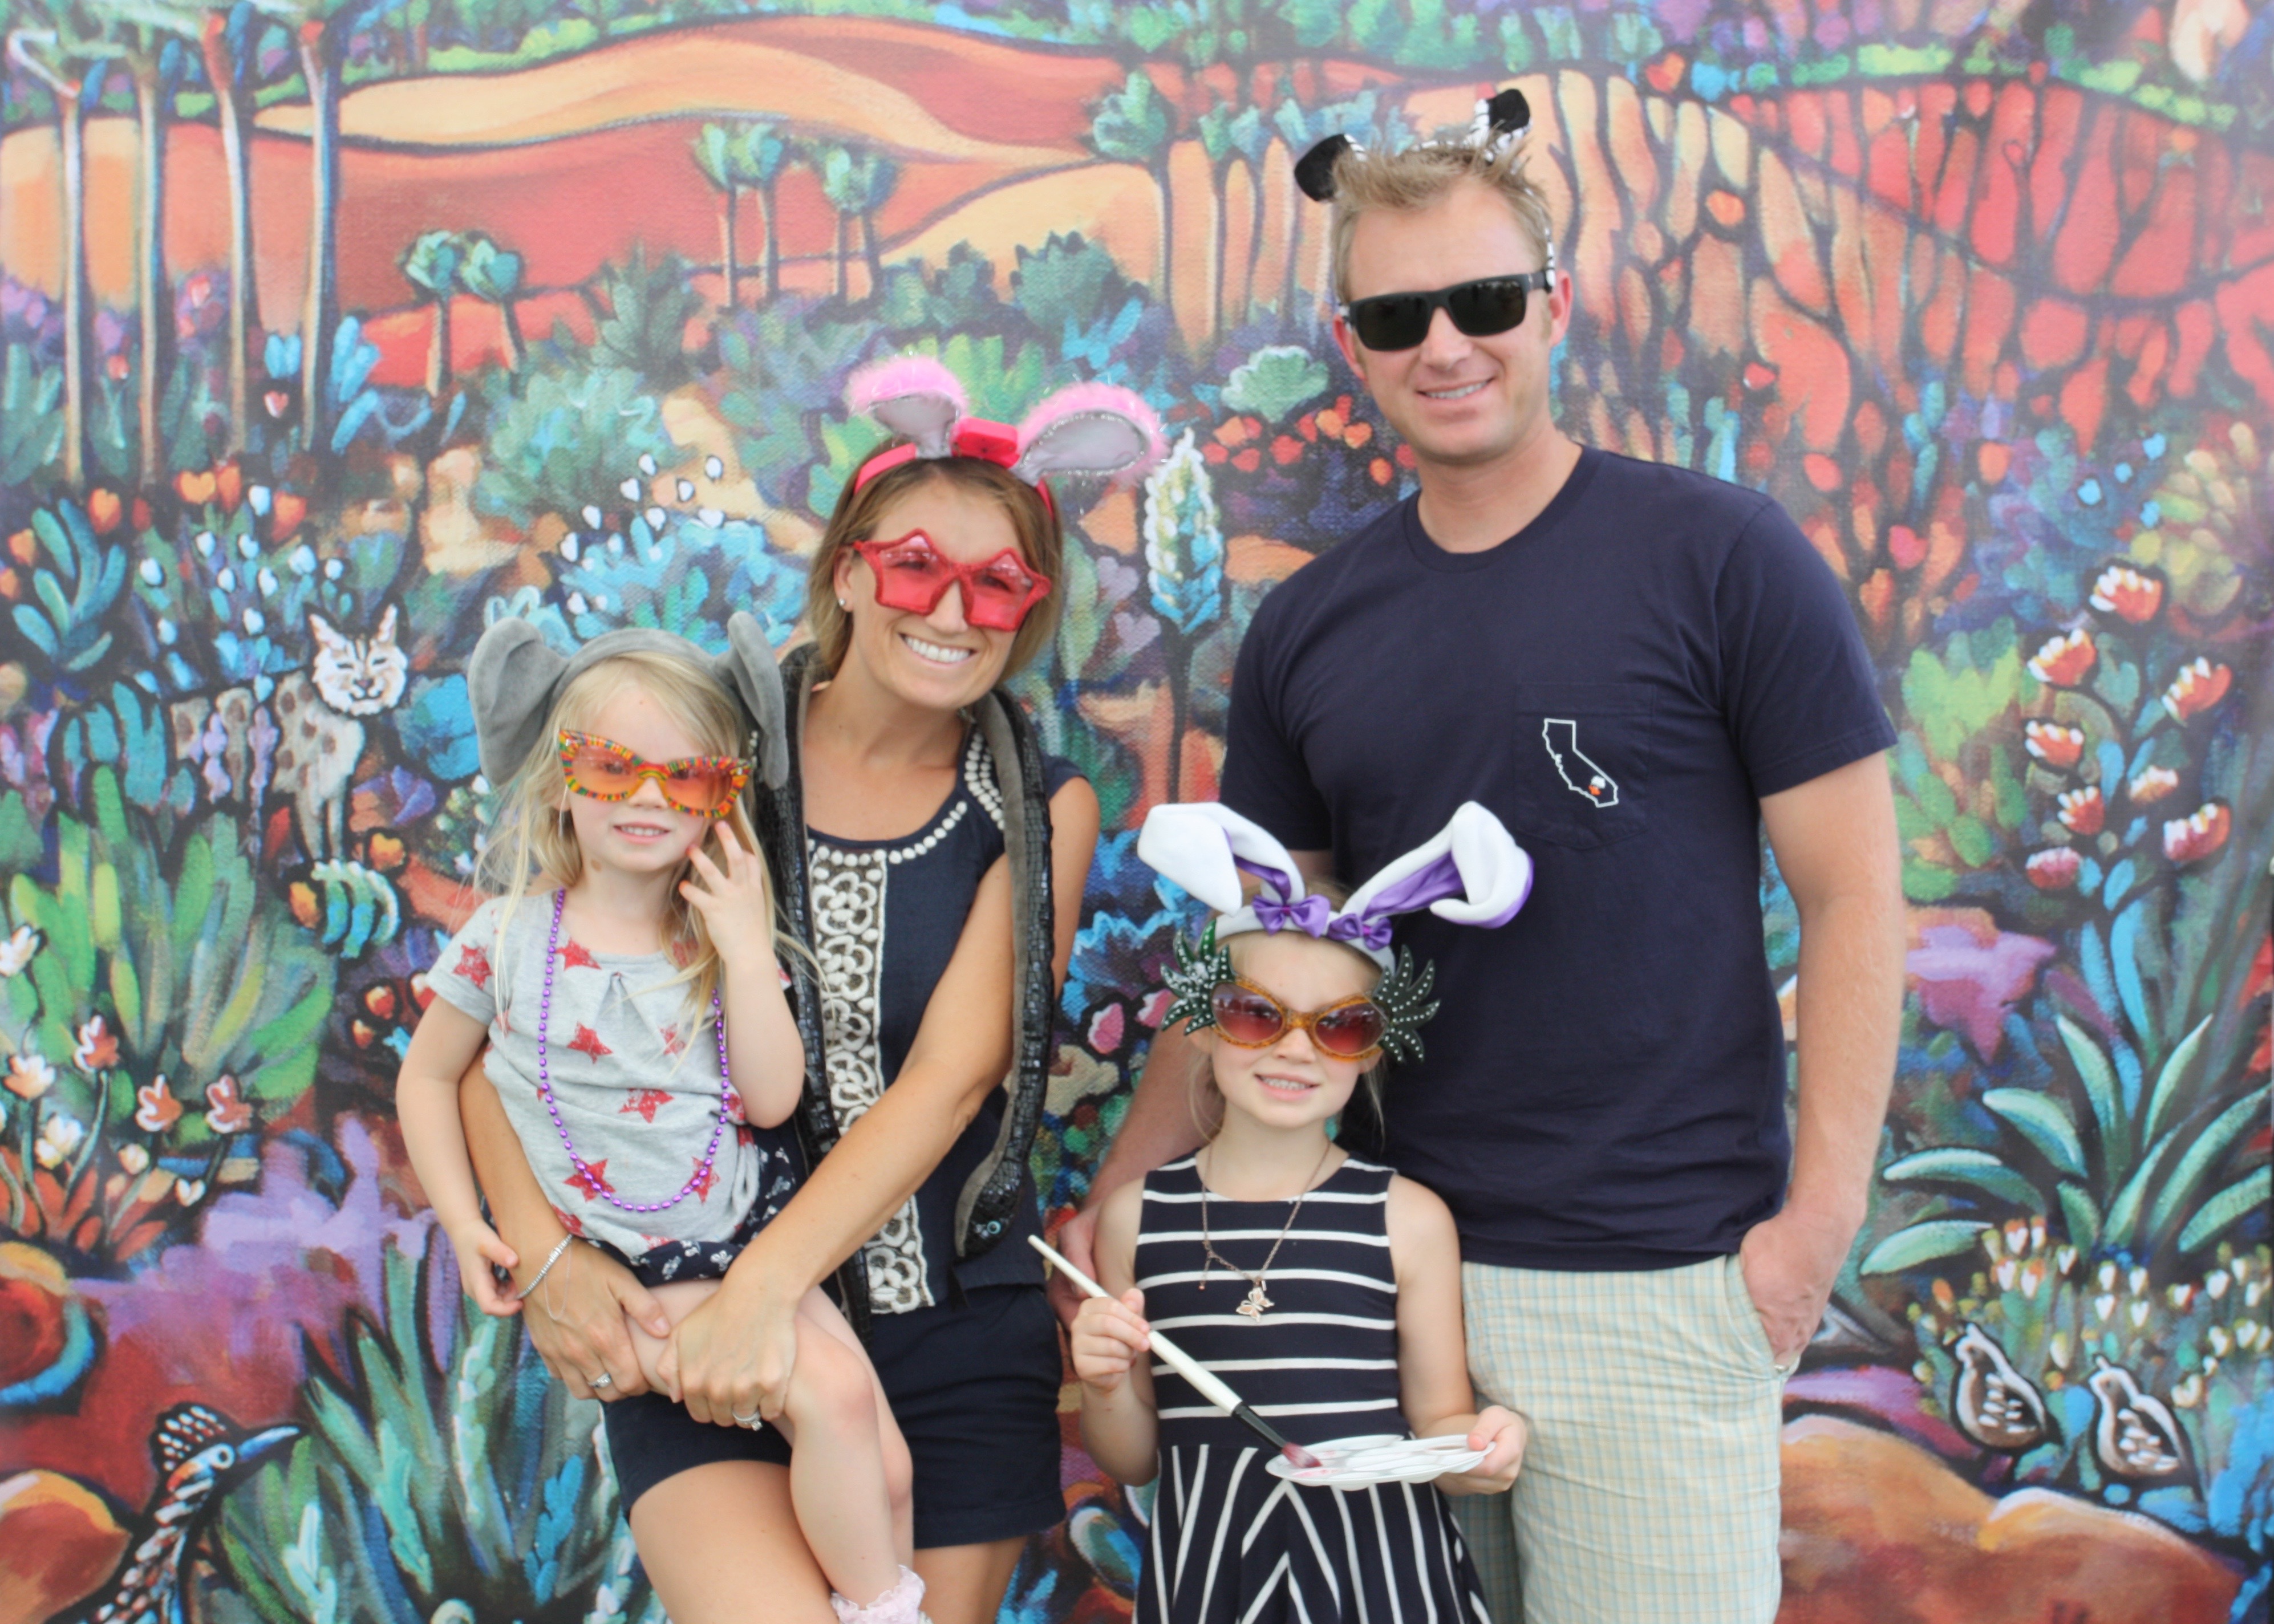 Fun for the whole family at the Indian Wells Arts Festival Commemorative Photo Booth